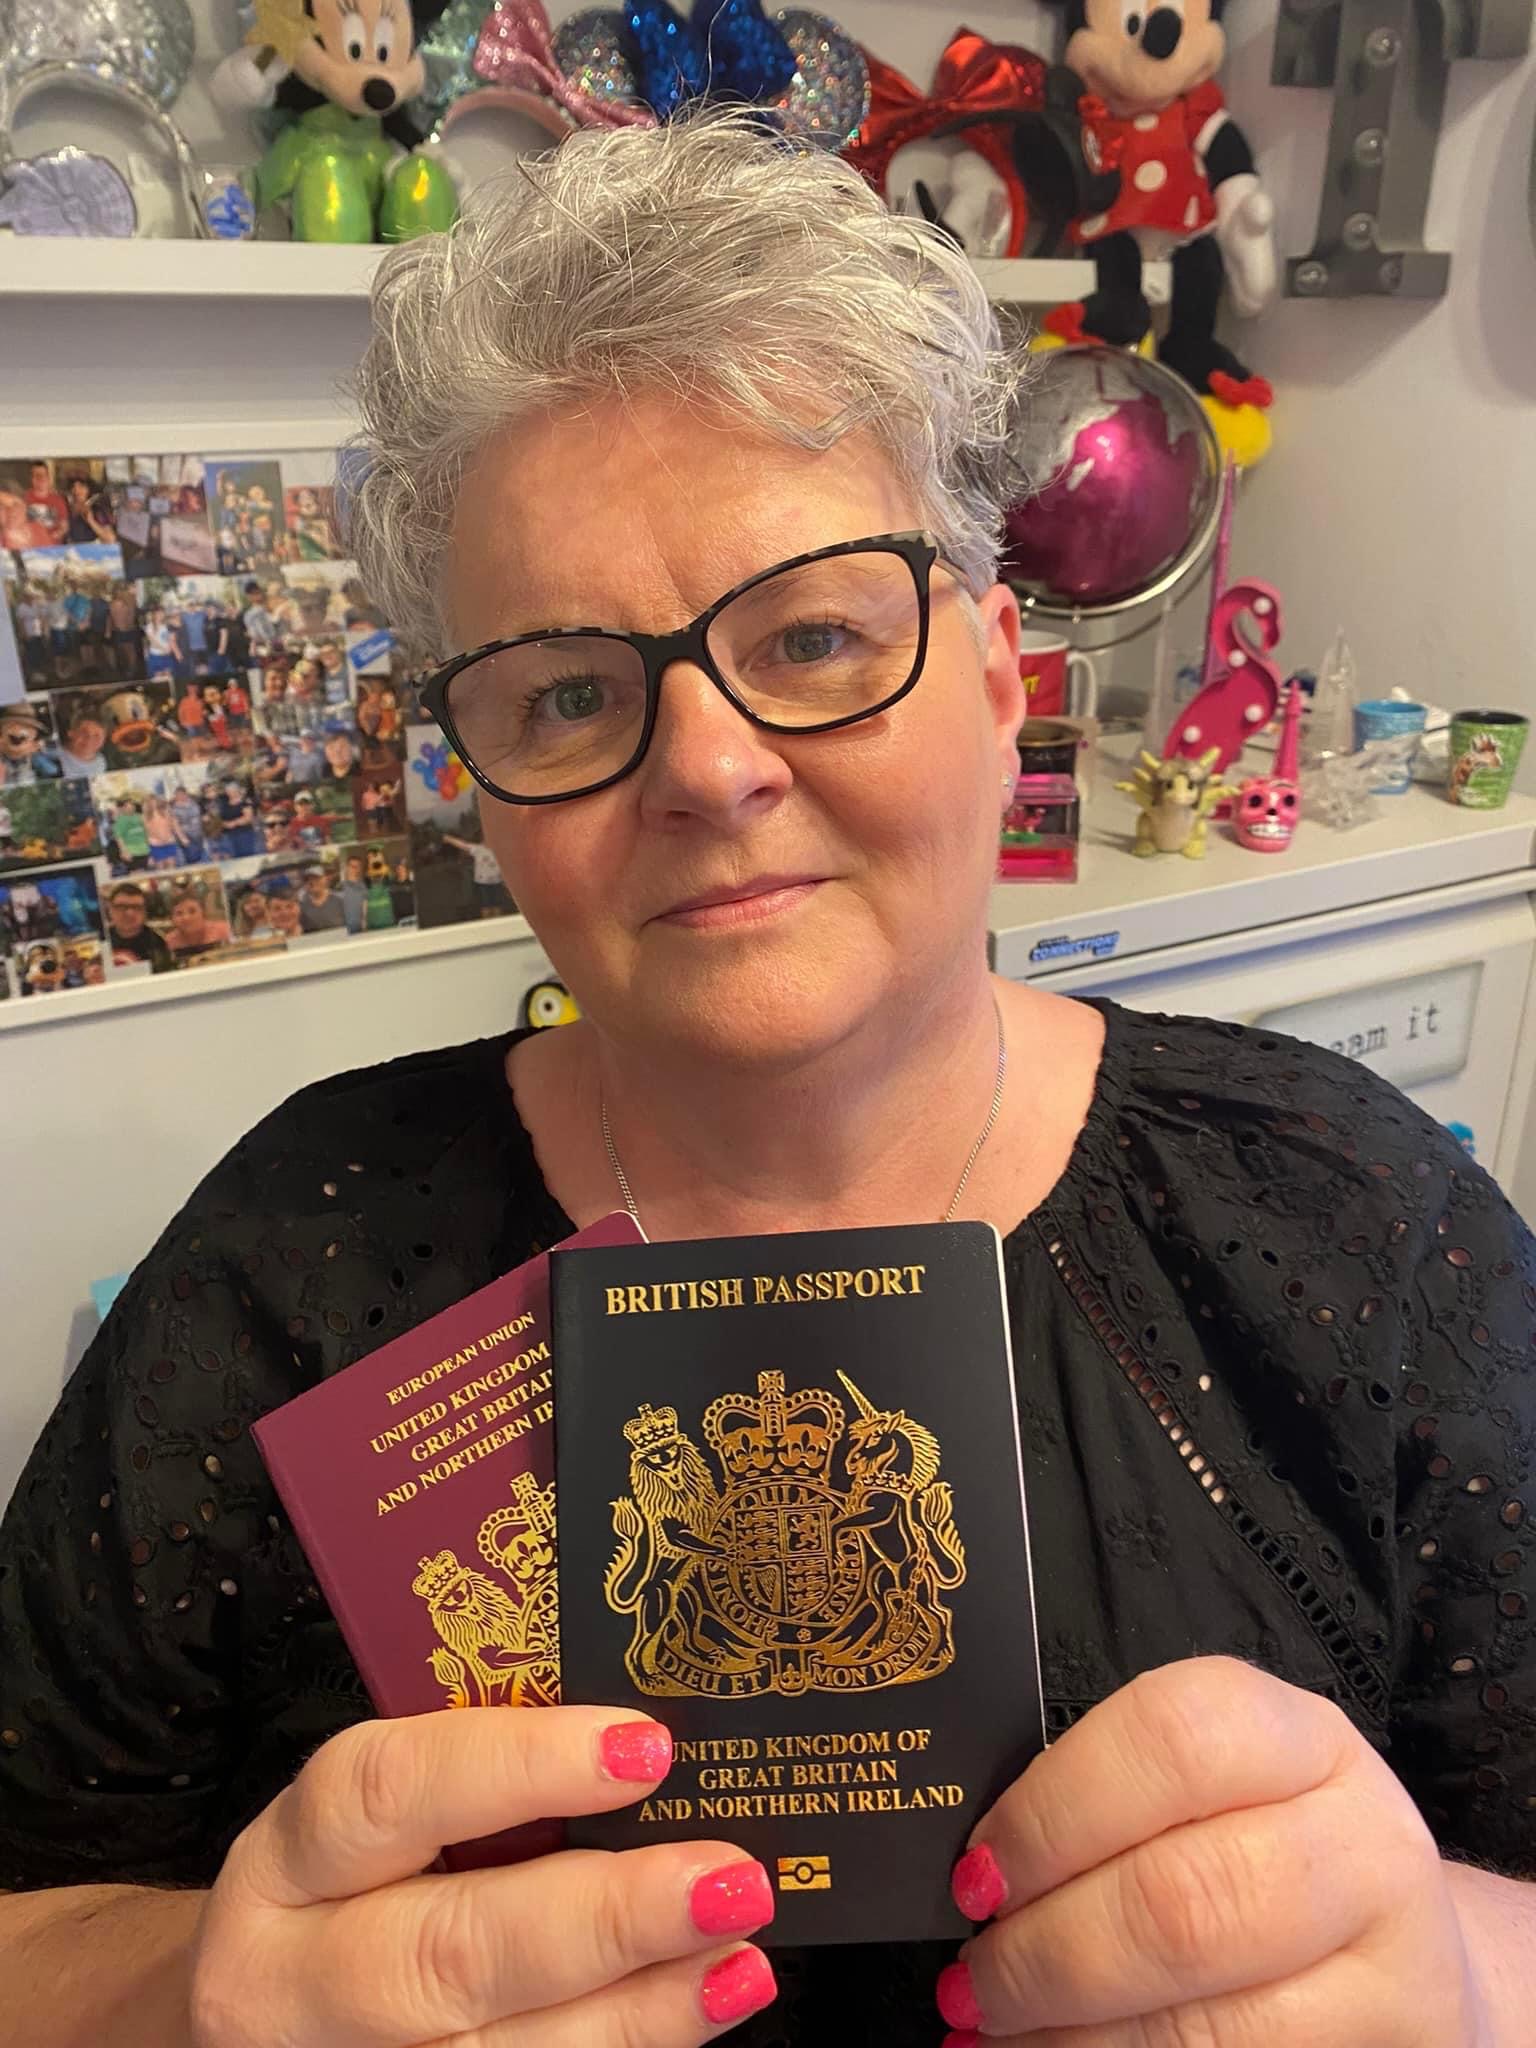 Alfreton based travel consultant Mandy Oldknow shares her advice ahead of the UK passport office strikes